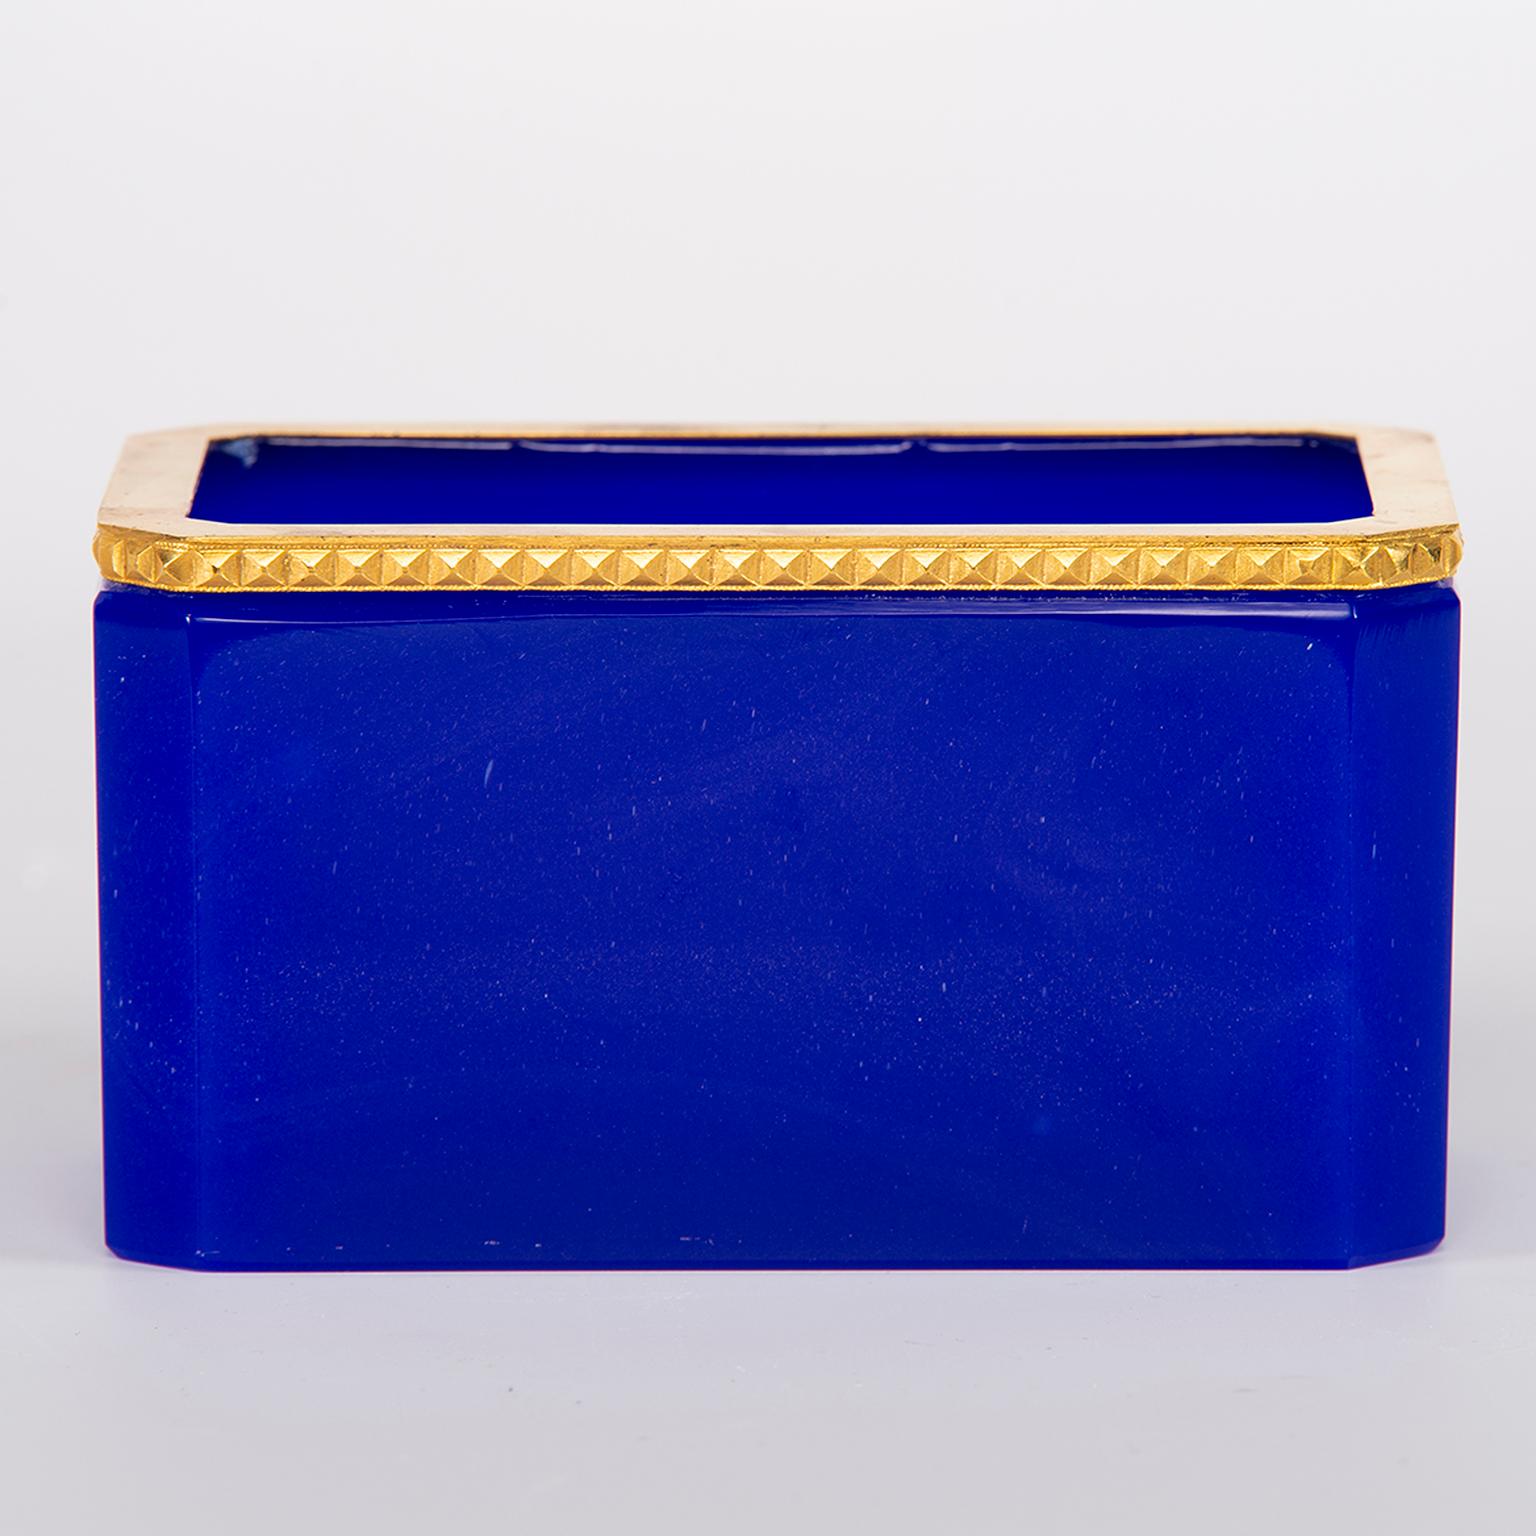 French brilliant royal blue rectangular opaline glass dish with polished brass trim, circa 1920s. Unknown maker.